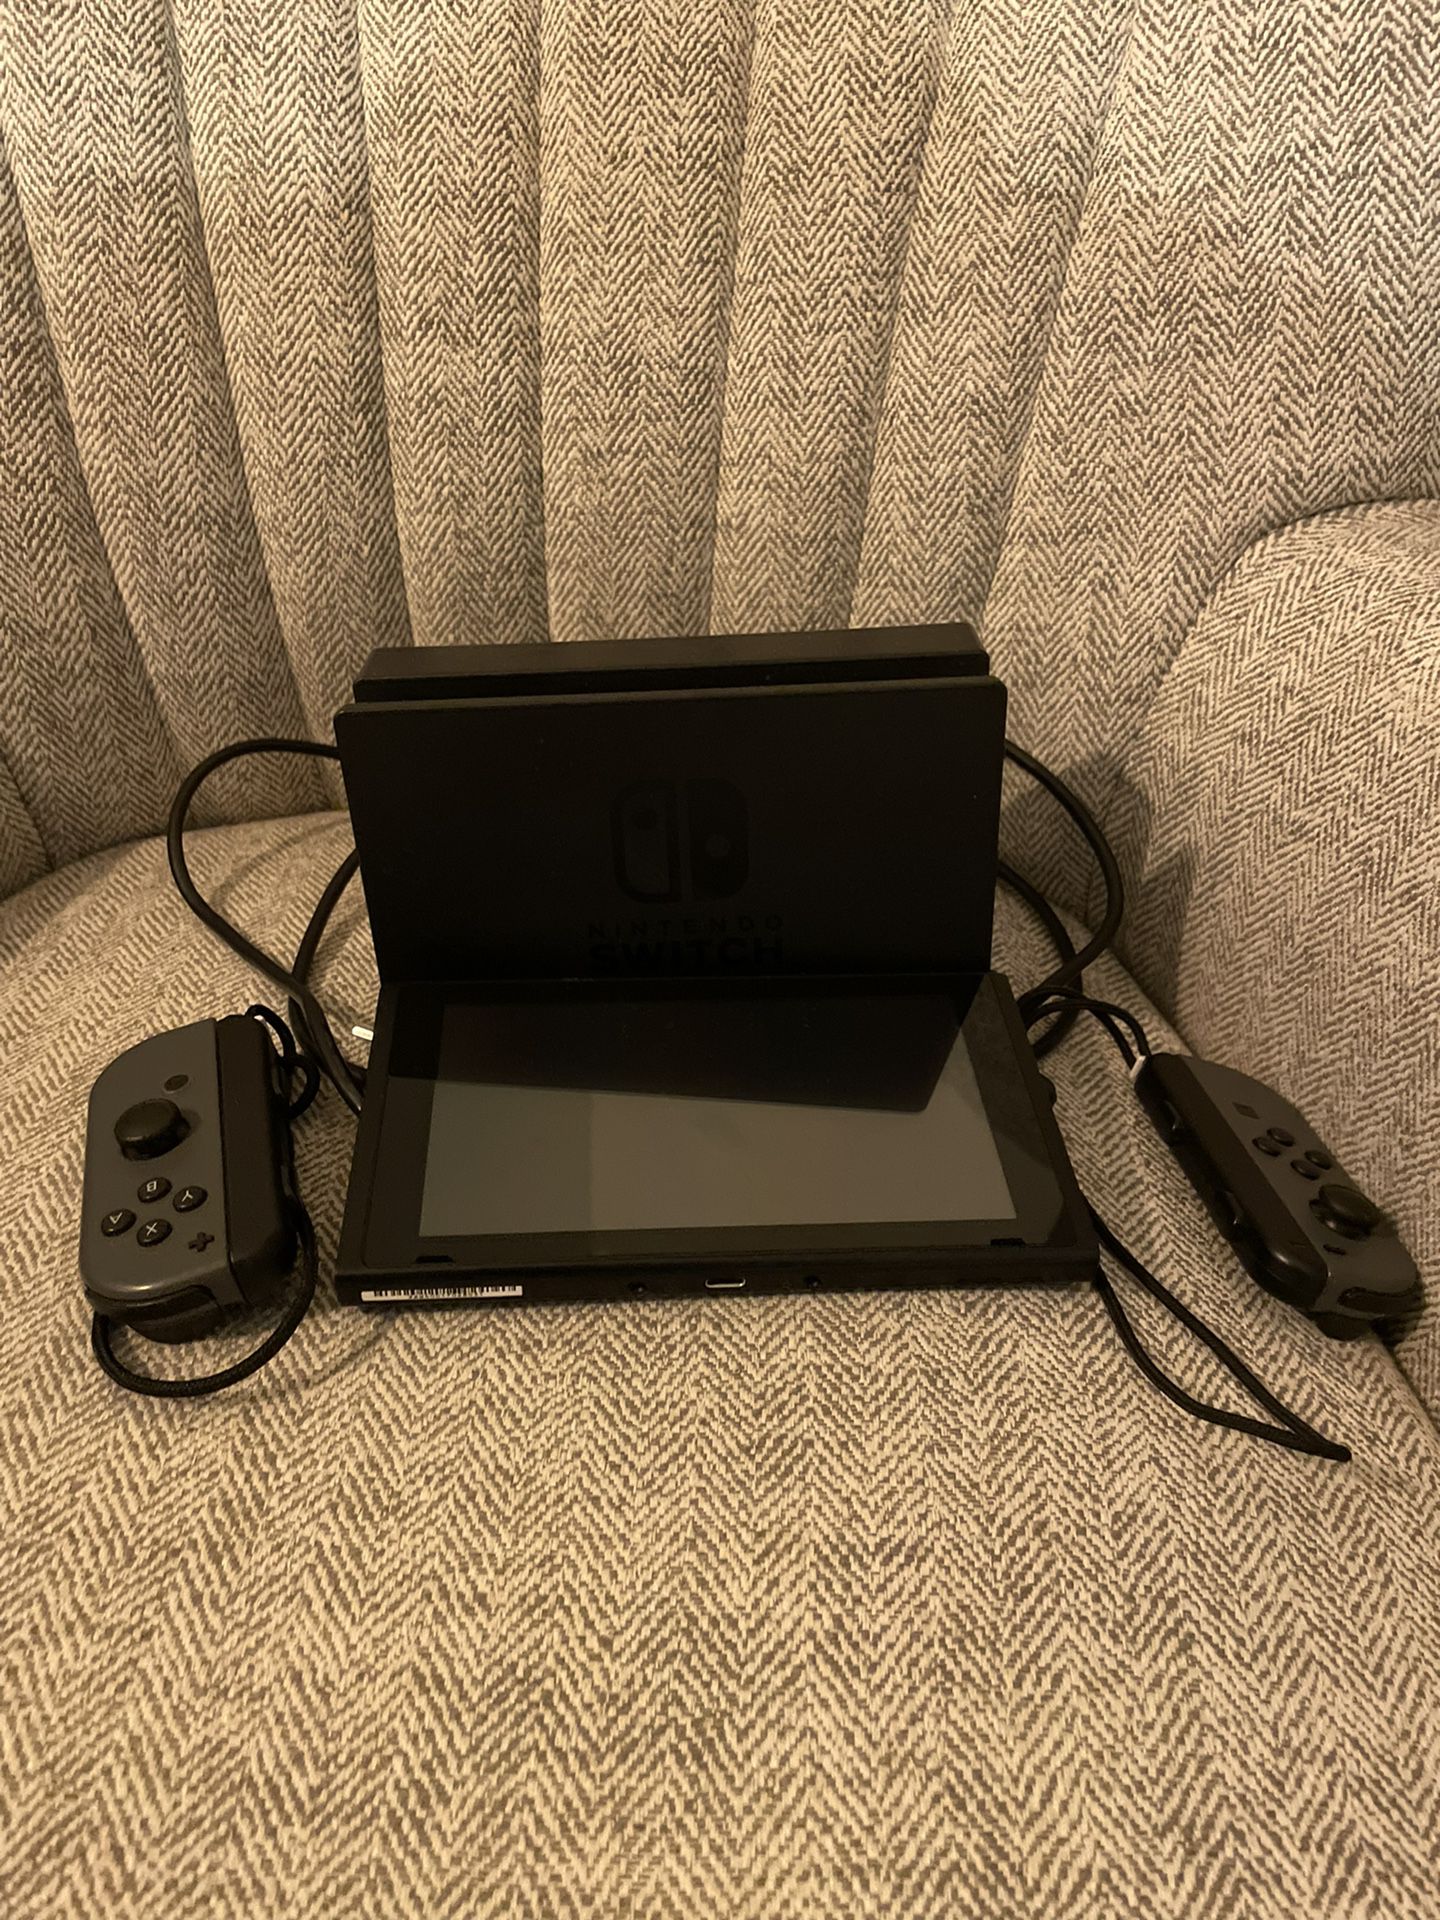 Nintendo Switch W/Controllers 